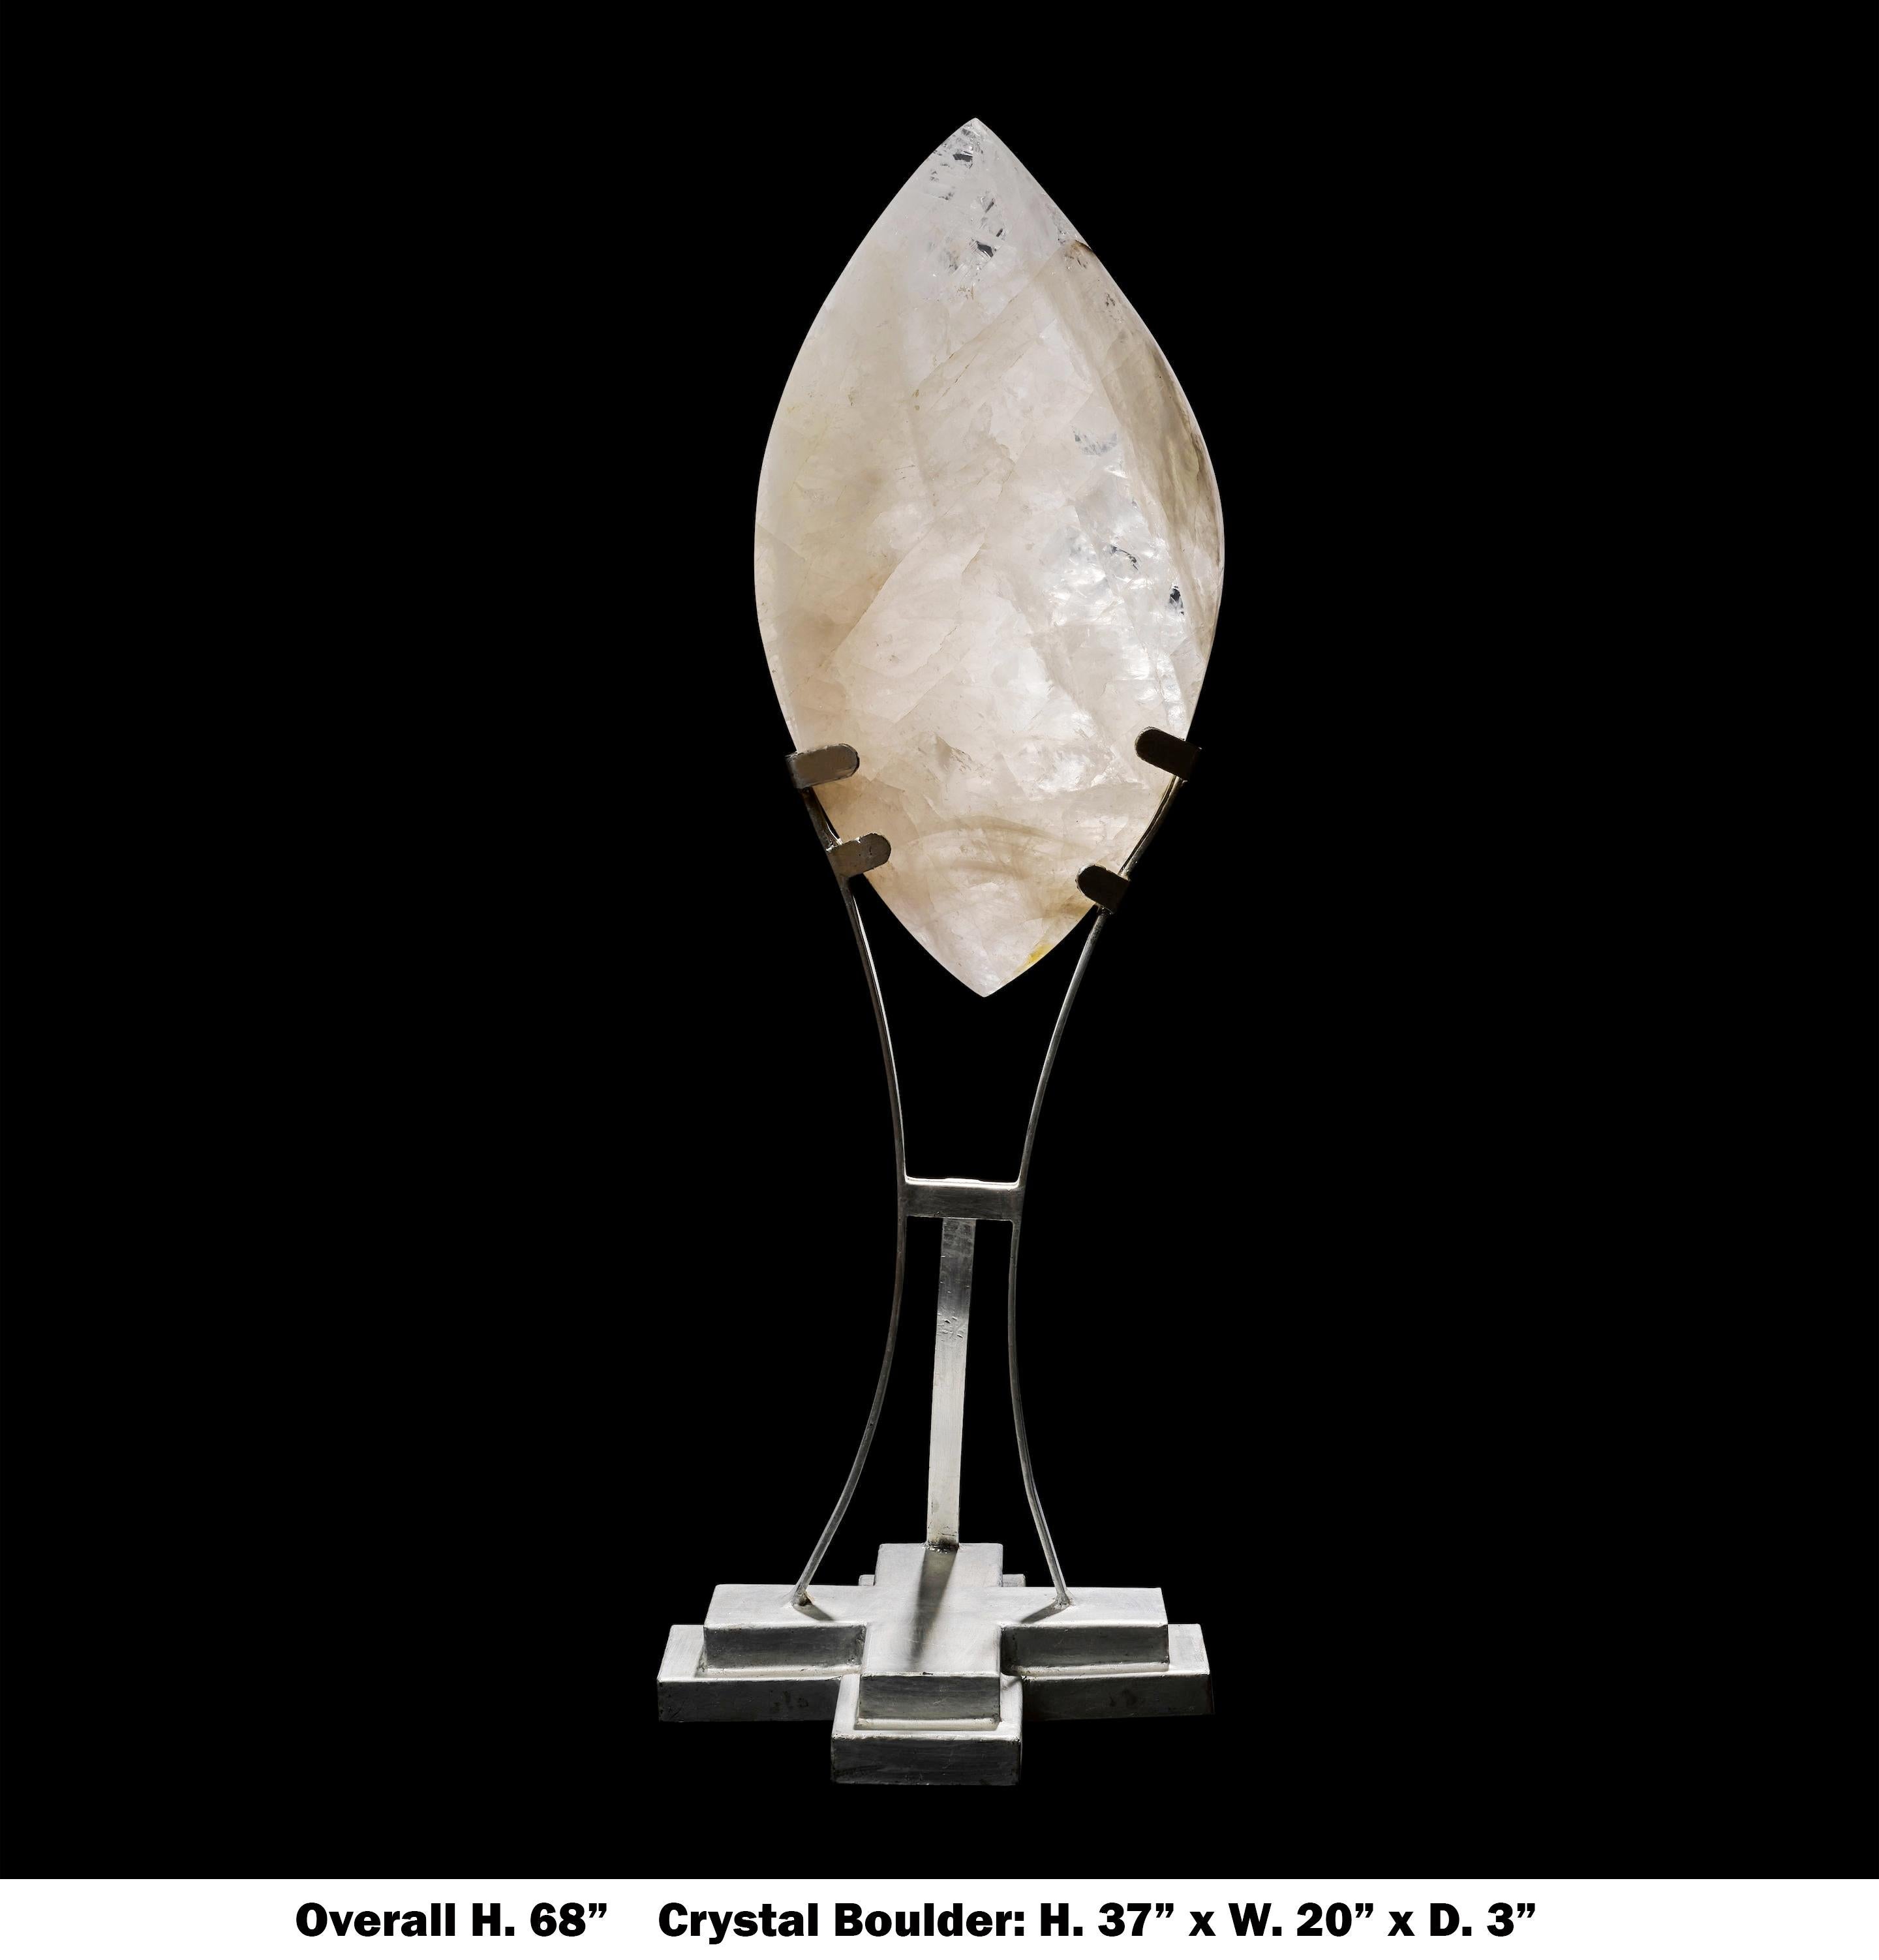 Impressive monumental carved rock crystal Quartz sculpture with custom stand
monumental sculpture of leaf-form, carved from a single large boulder of rock crystal quartz, with sufficient transparency to transmit light. Beautifully displayed on a